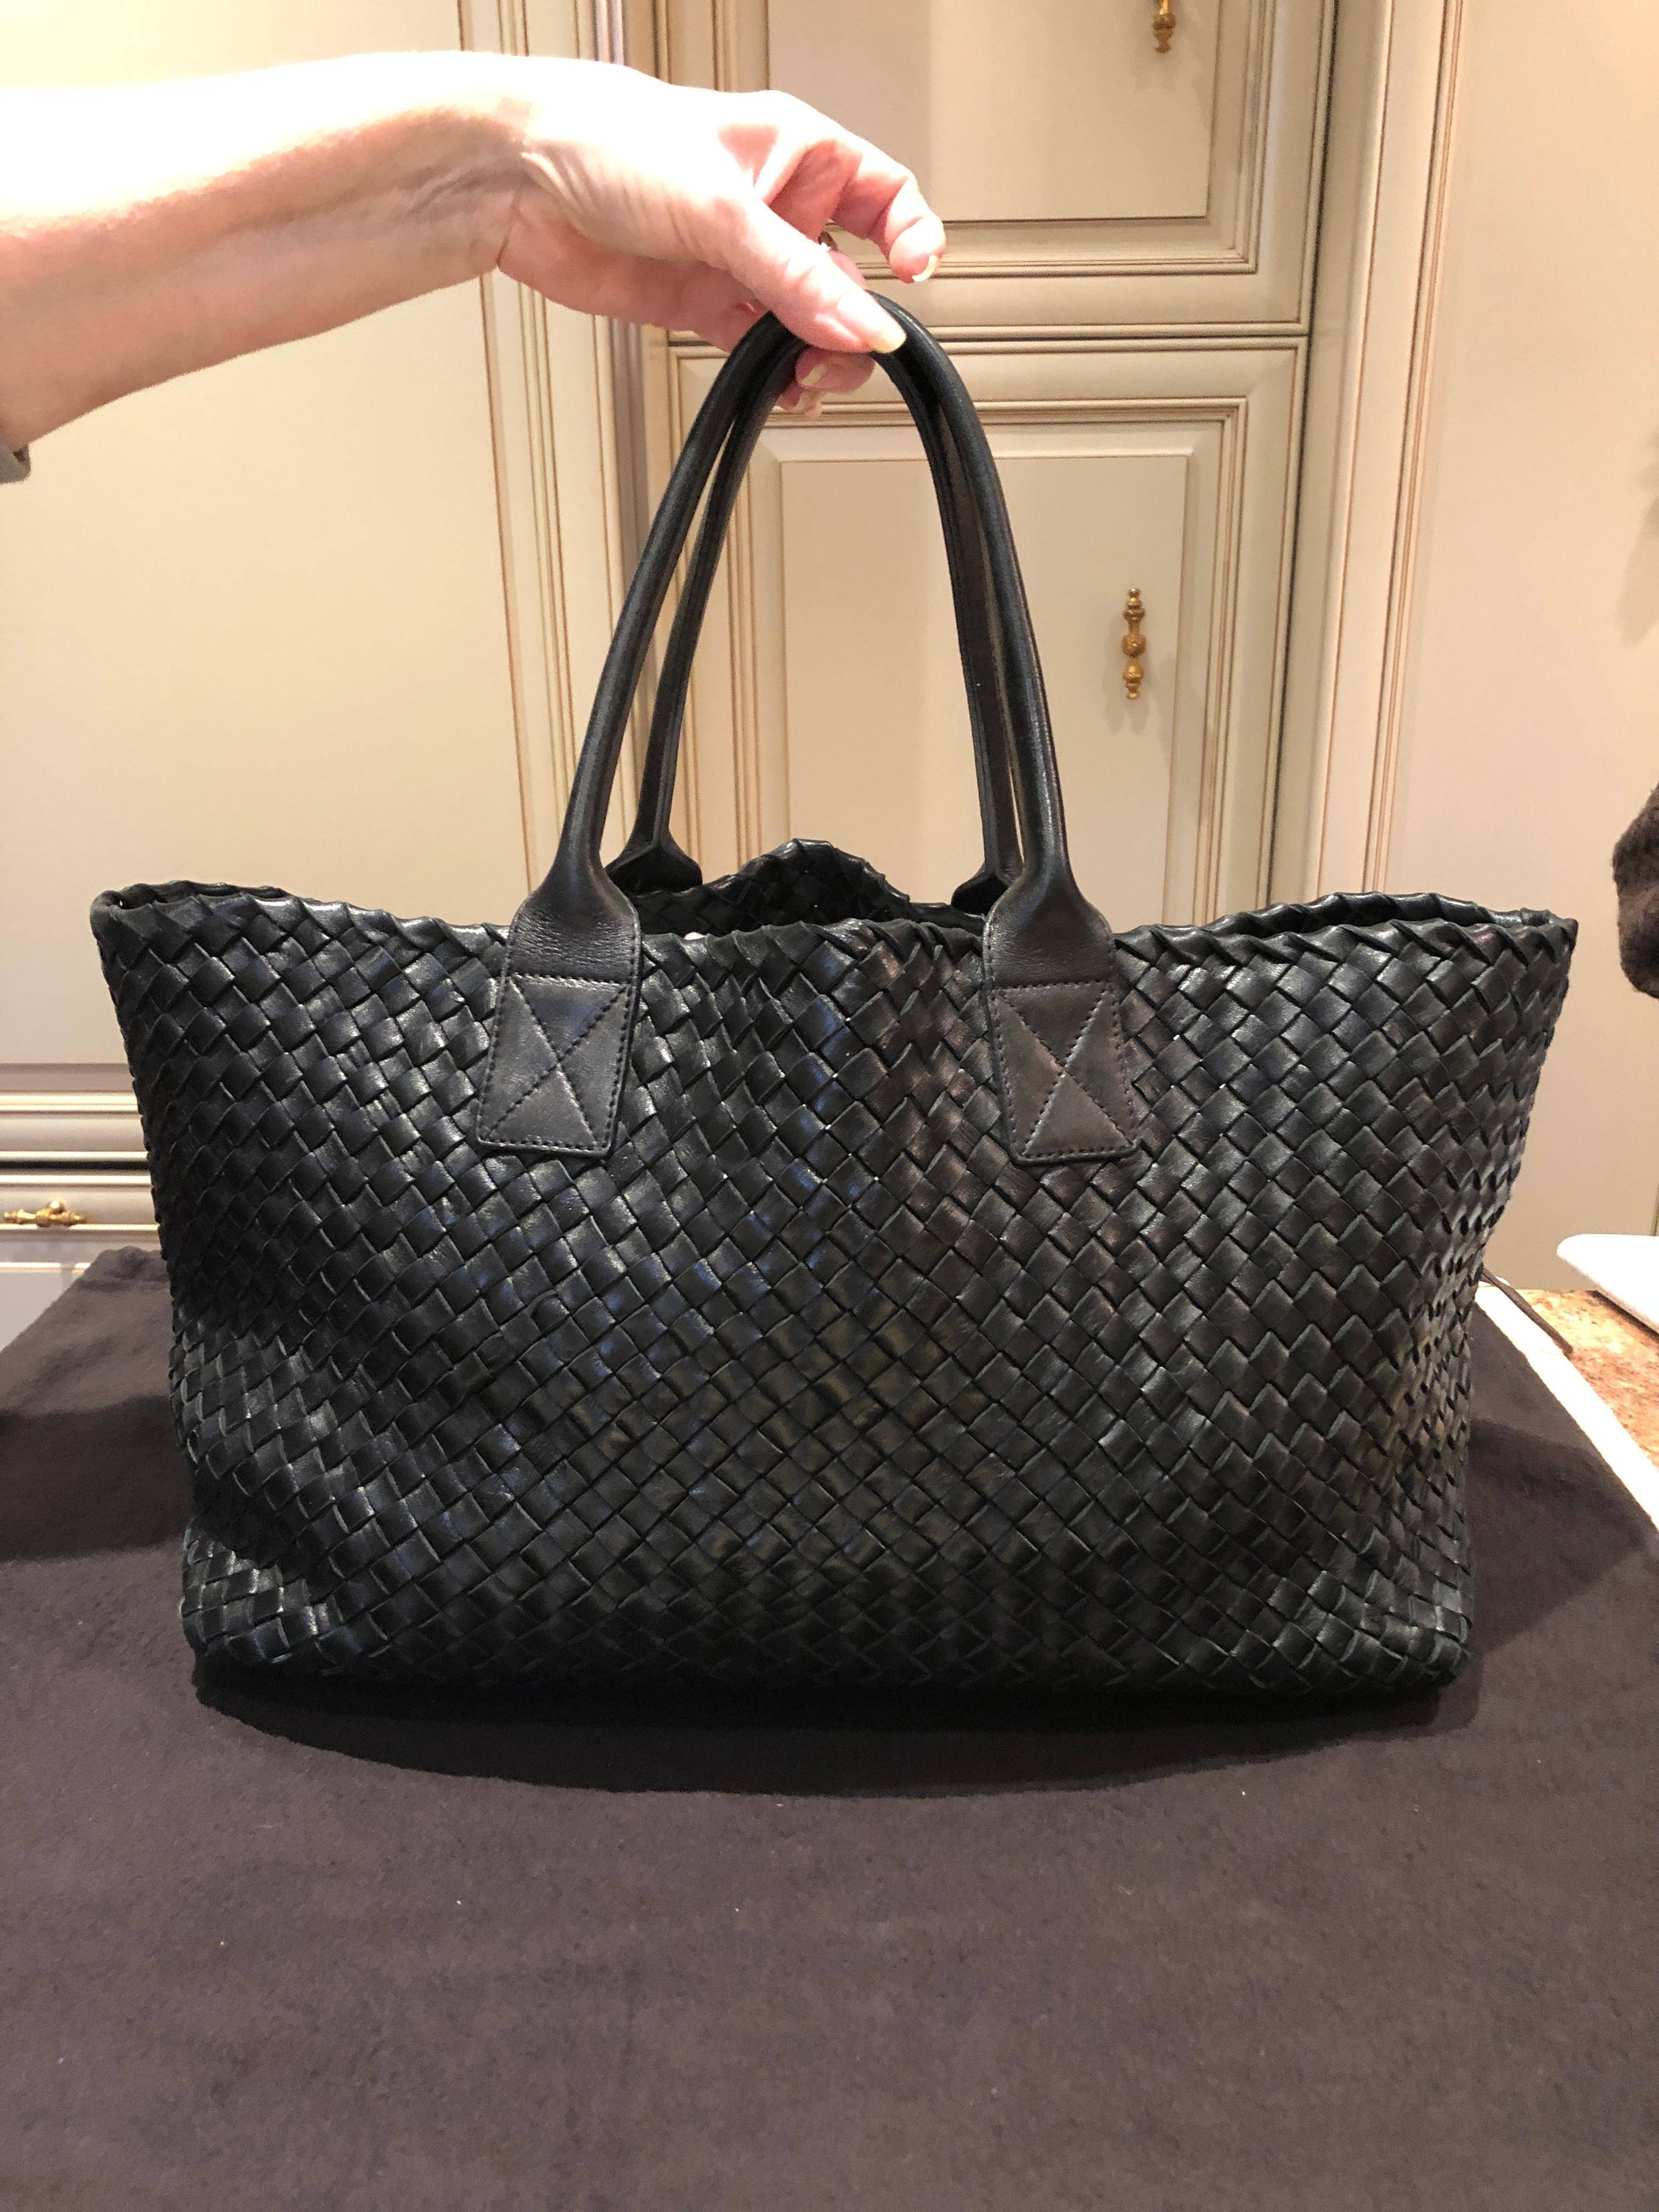 The Cabat is Bottega Veneta’s most iconic design—a deceptively simple seamless tote that’s finished as beautifully on the inside as it is on the outside. Designed to be both spacious and lightweight, this version is made entirely of soft nappa